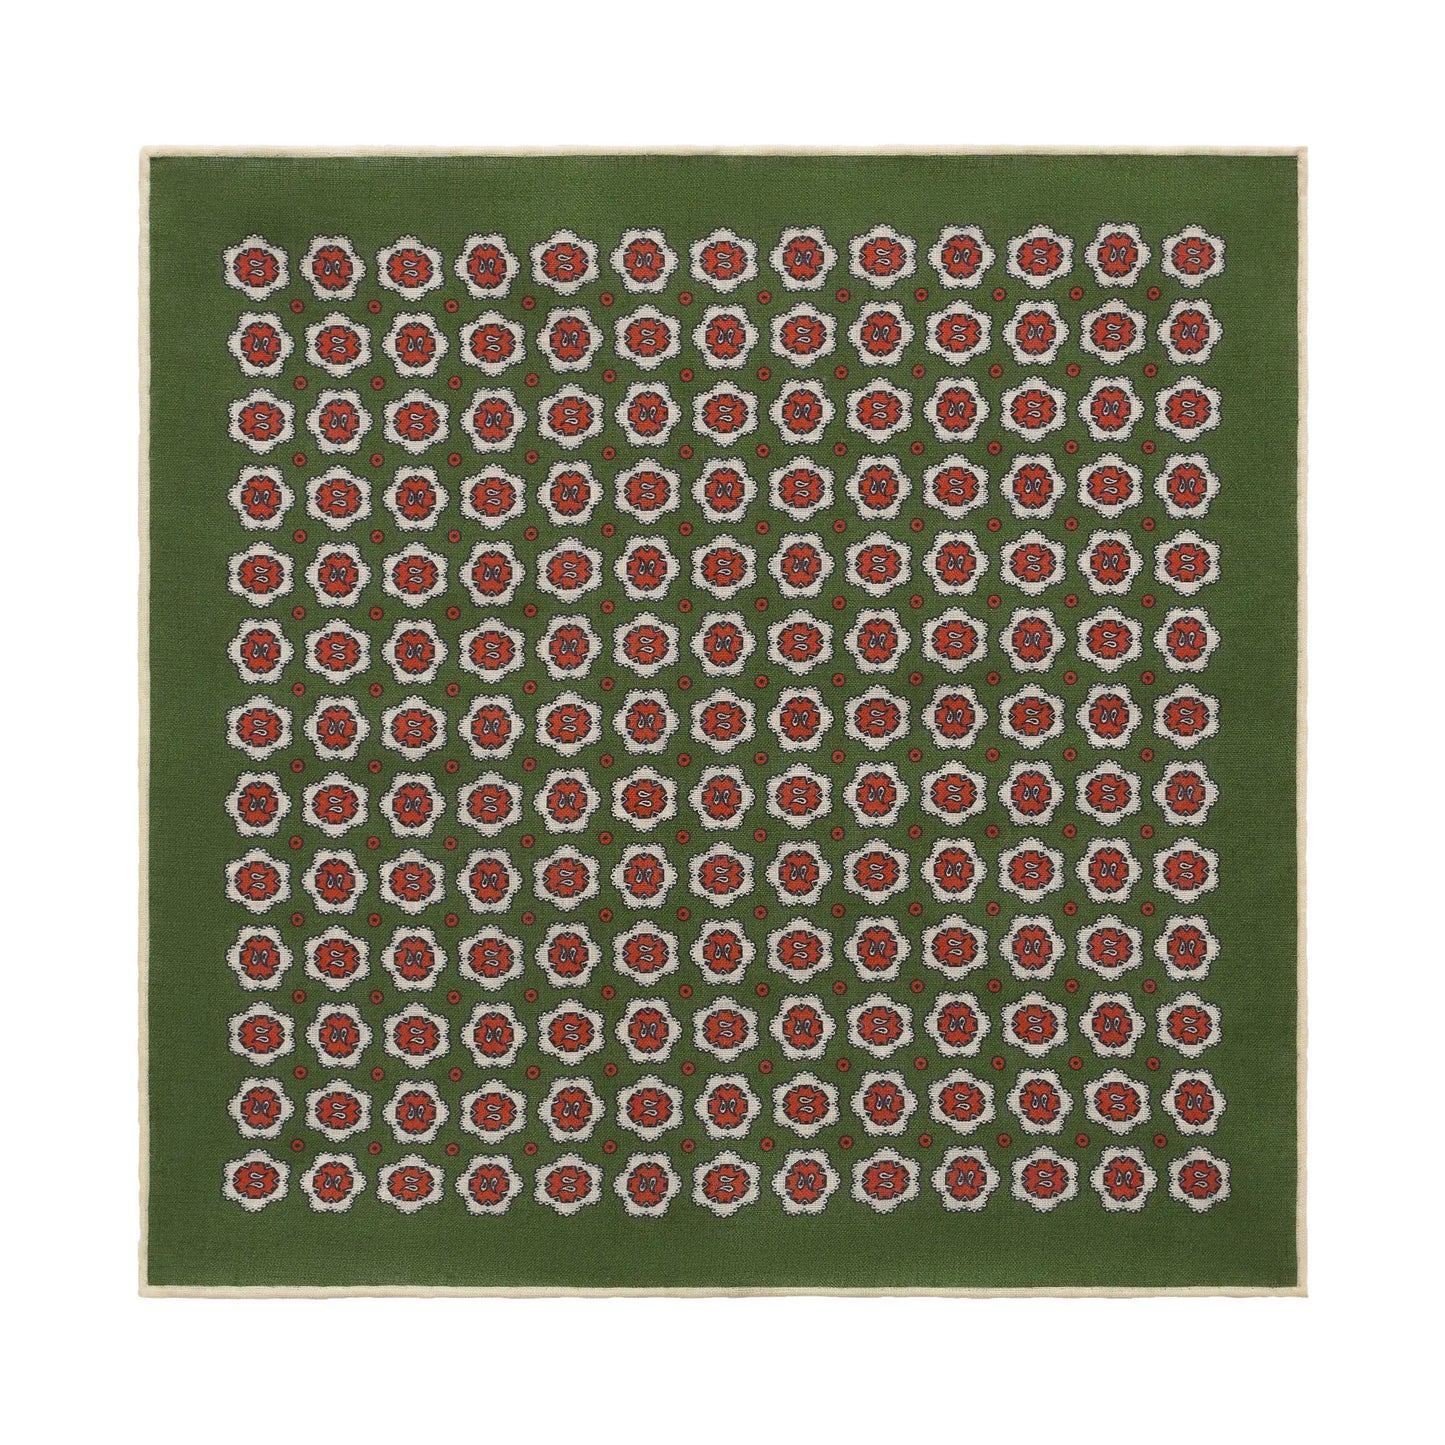 Printed Linen Pocket Square in Green